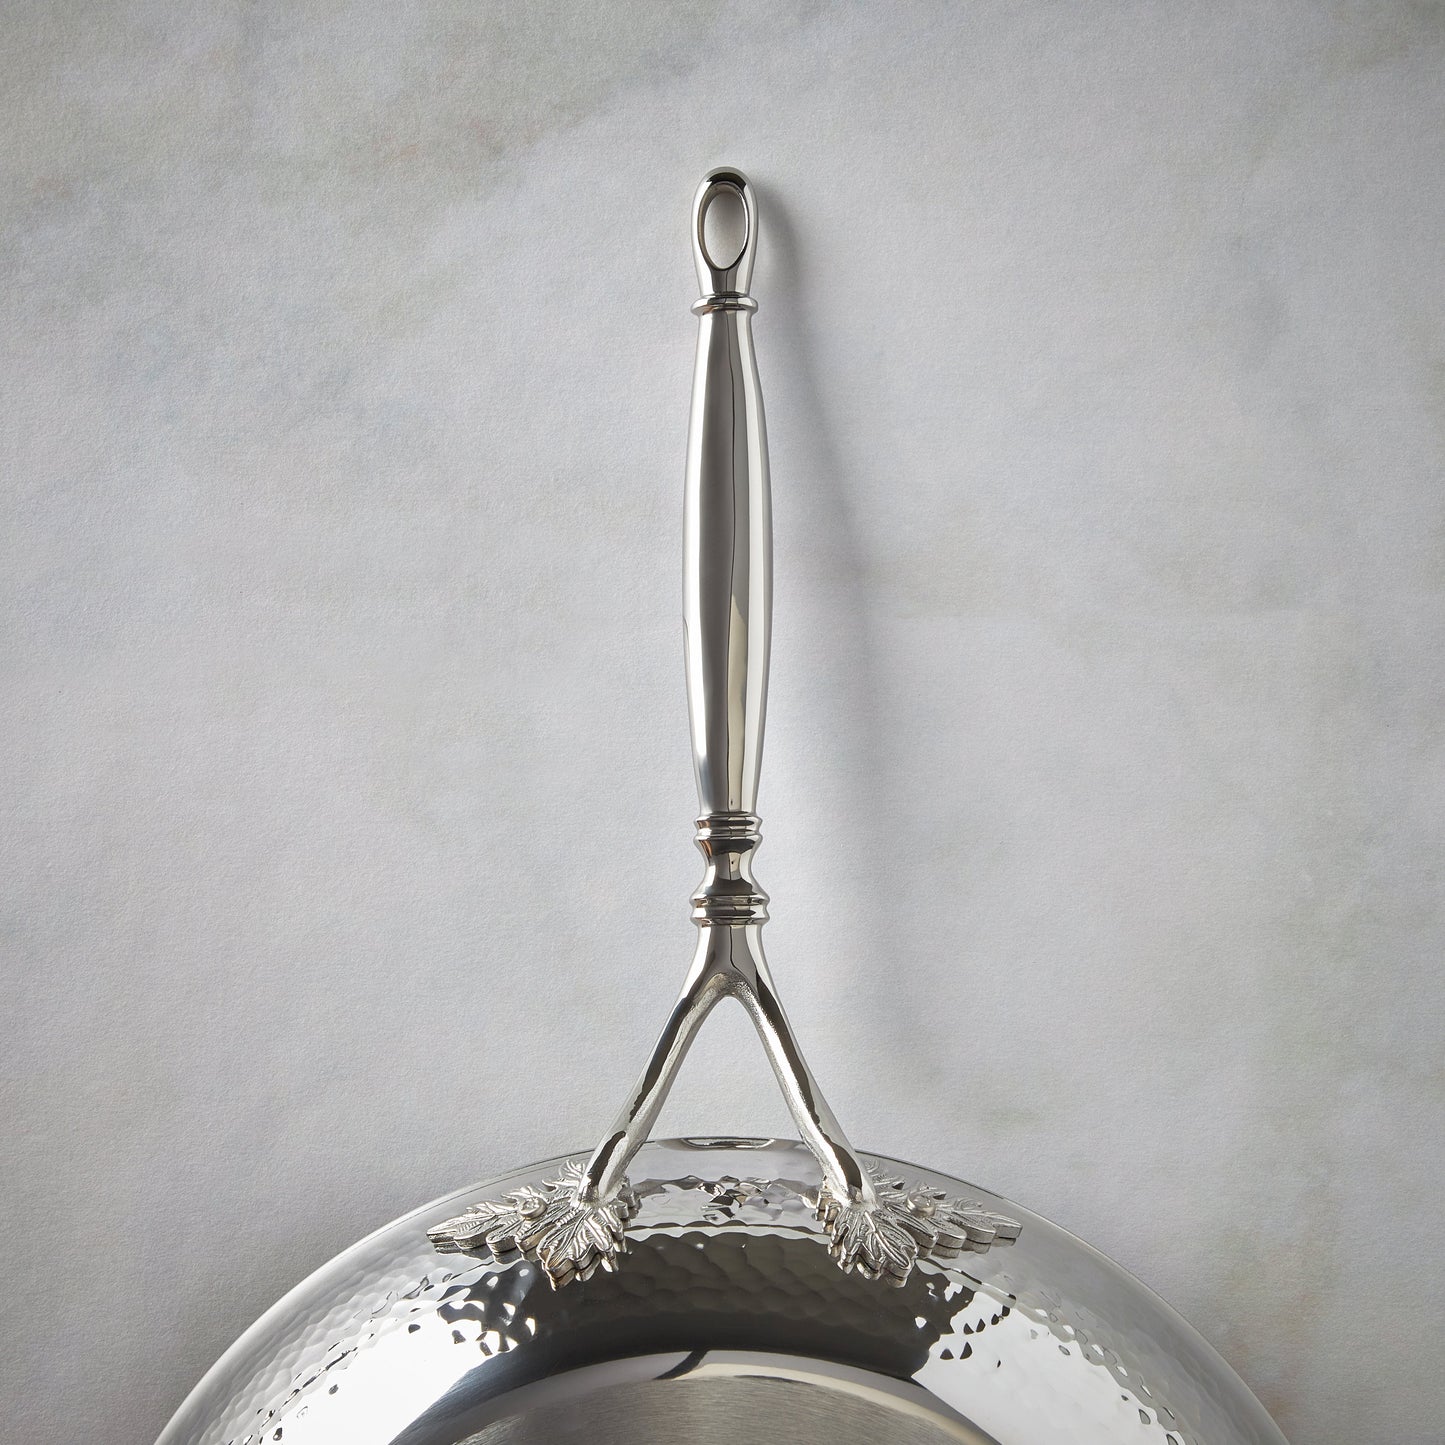 Beautiful stainless steel long stick handle decorated with delicate leaves on Opus Prima cookware by Ruffoni